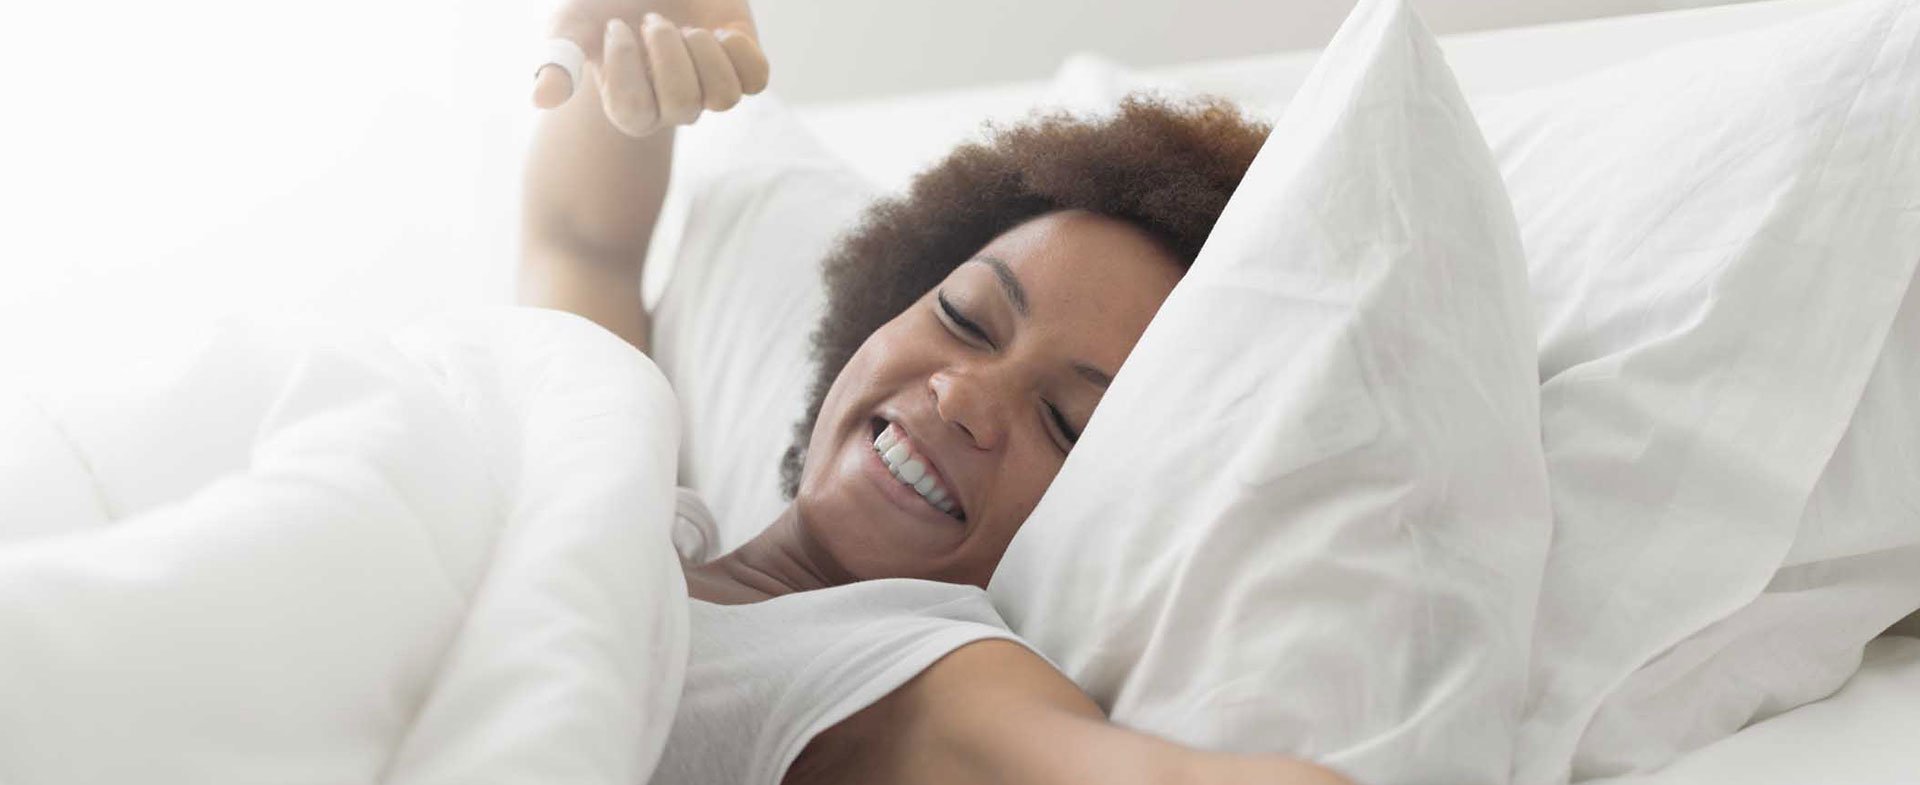 1 in 5 US adults 'rarely or never' wakes up feeling well-rested